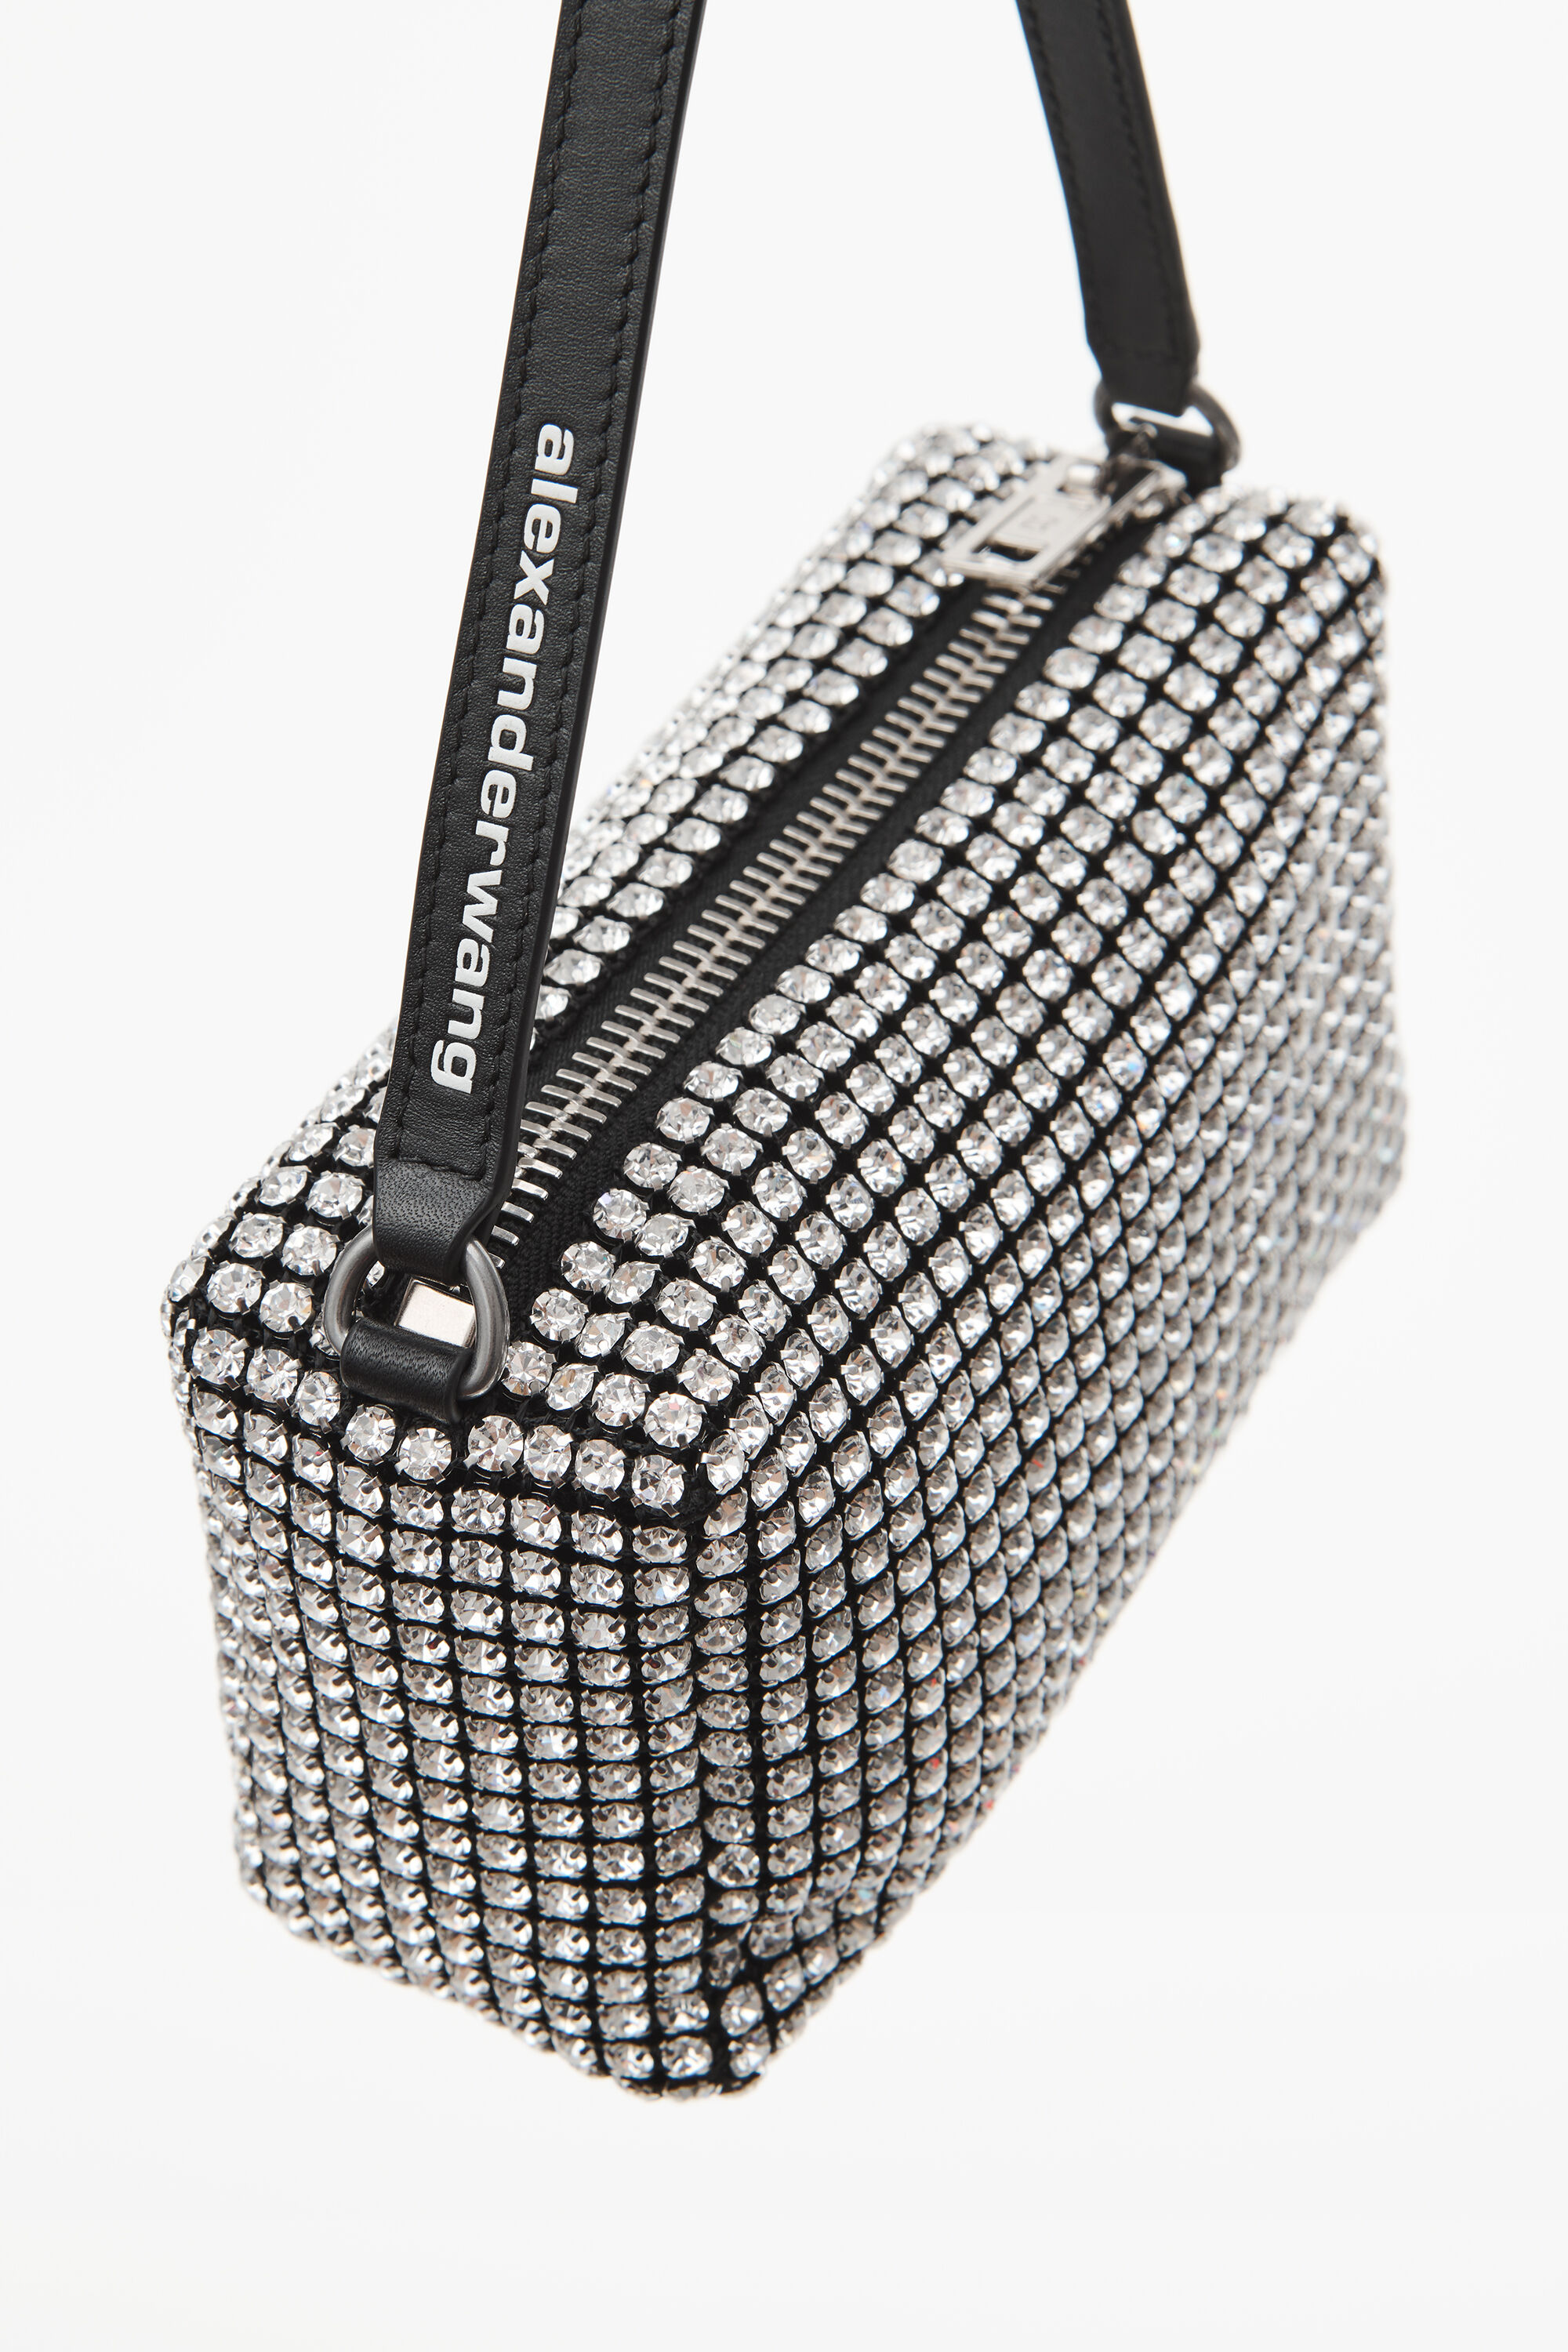 HEIRESS POUCH IN CRYSTAL MESH in WHITE | polyester lining 